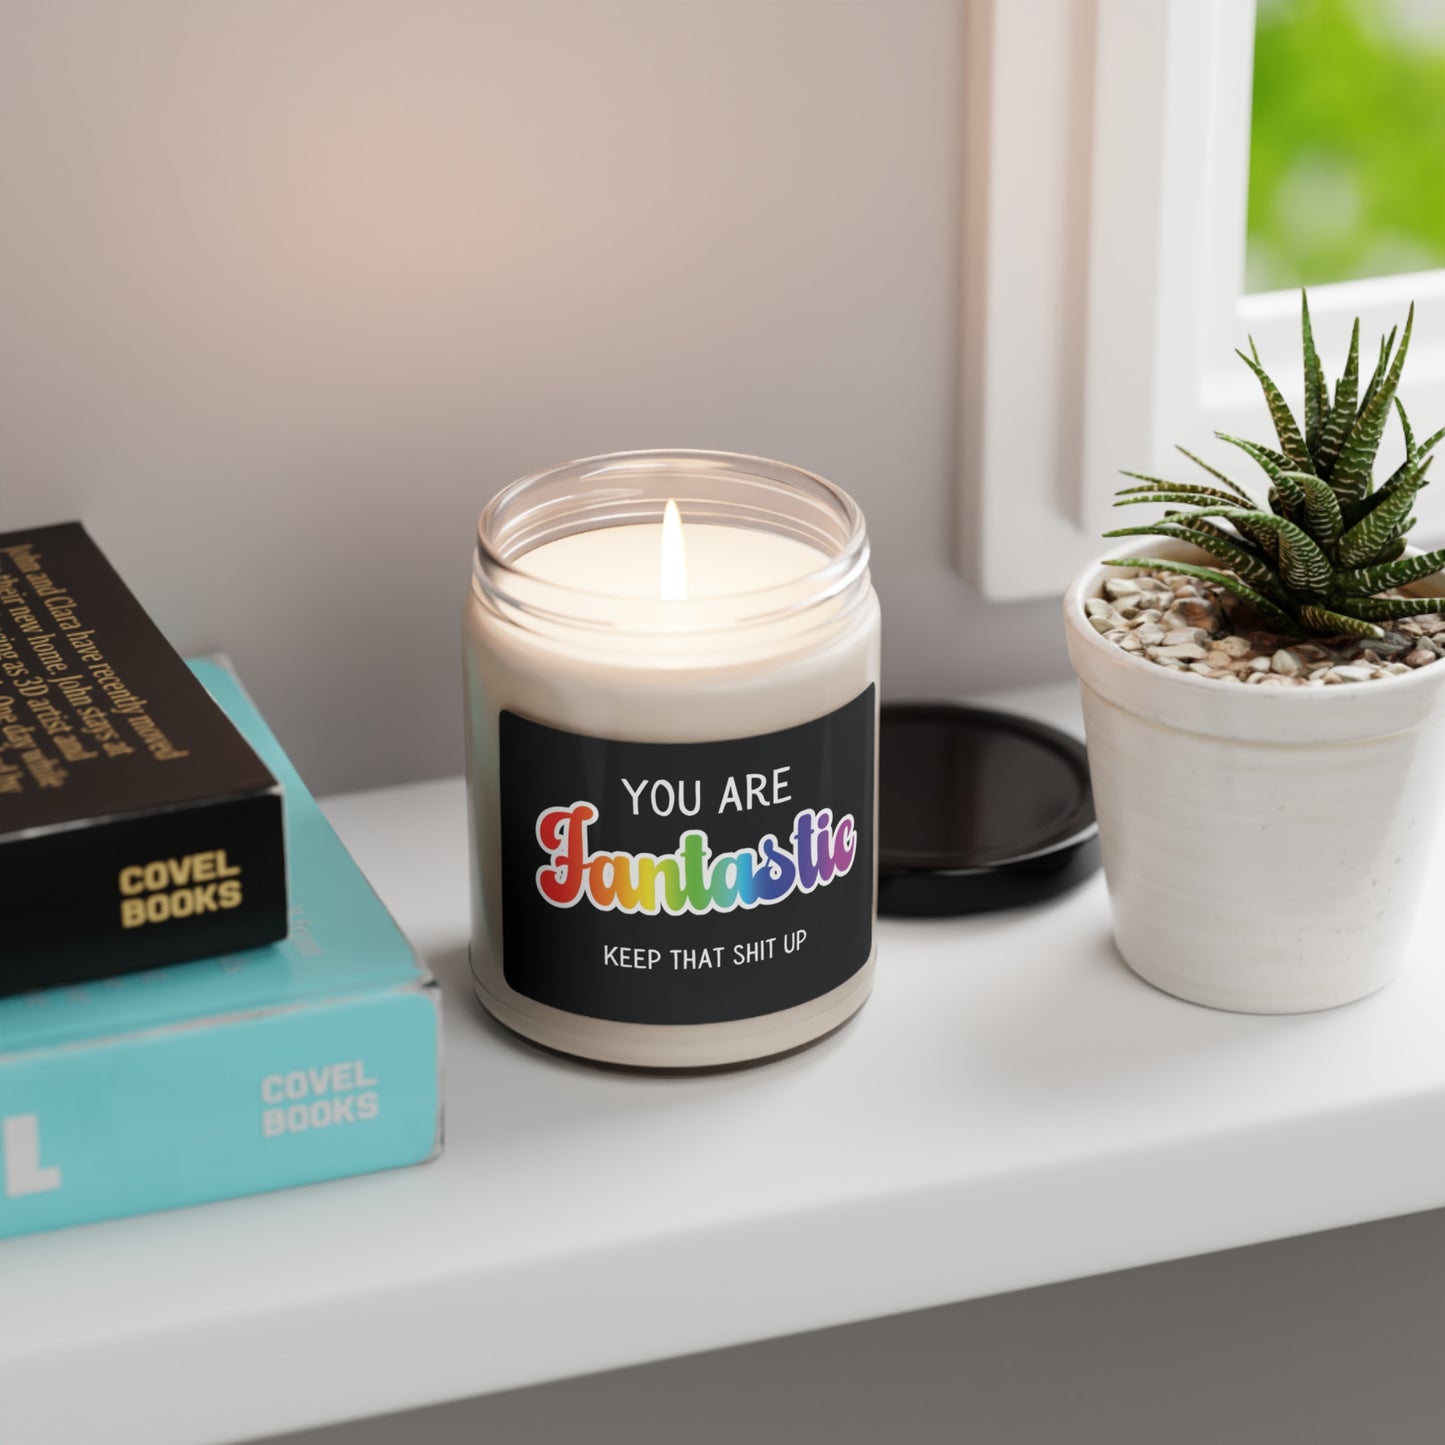 "You Are Fantastic" Scented Soy Candle, 9oz